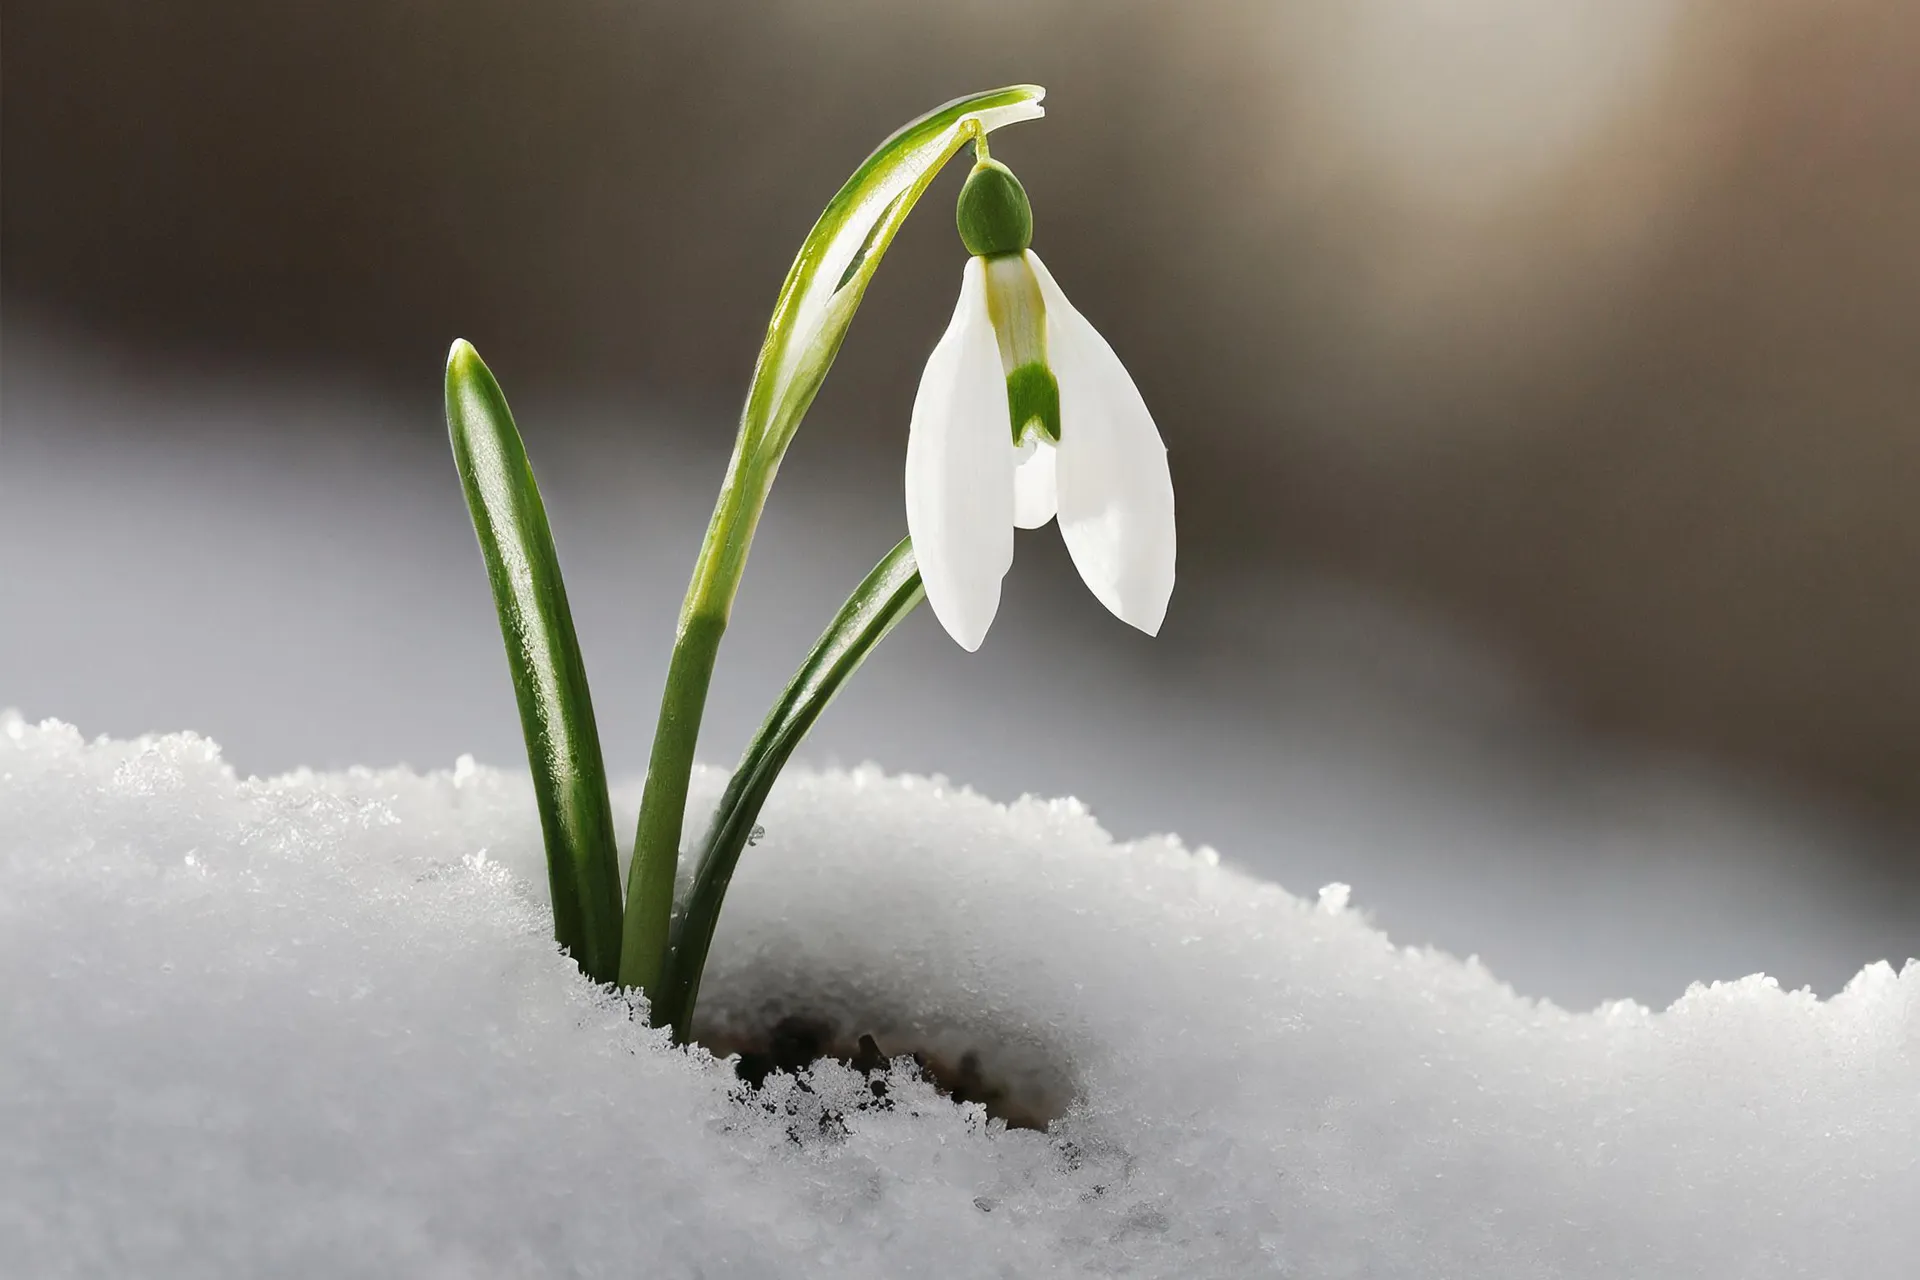 White snowdrop flower with green leaves emerging from the snow.